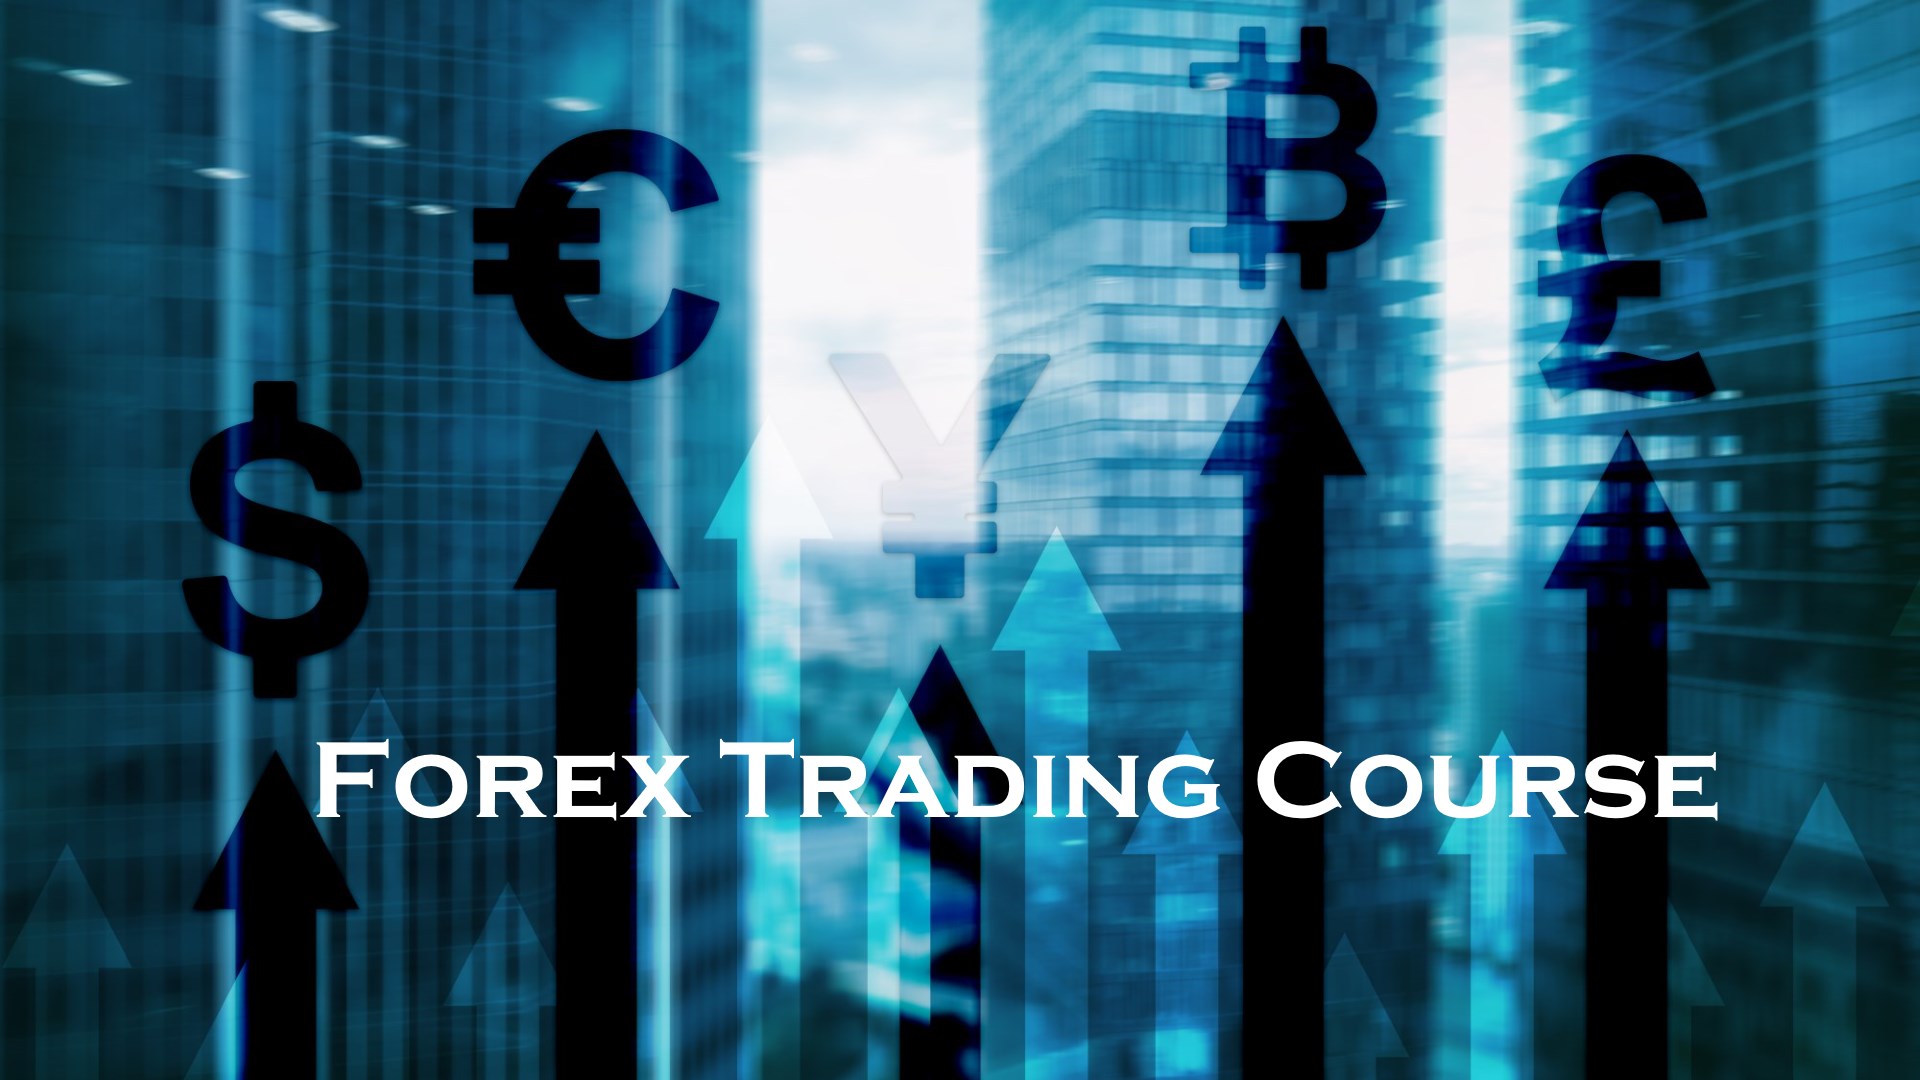 Forex trading with small investment